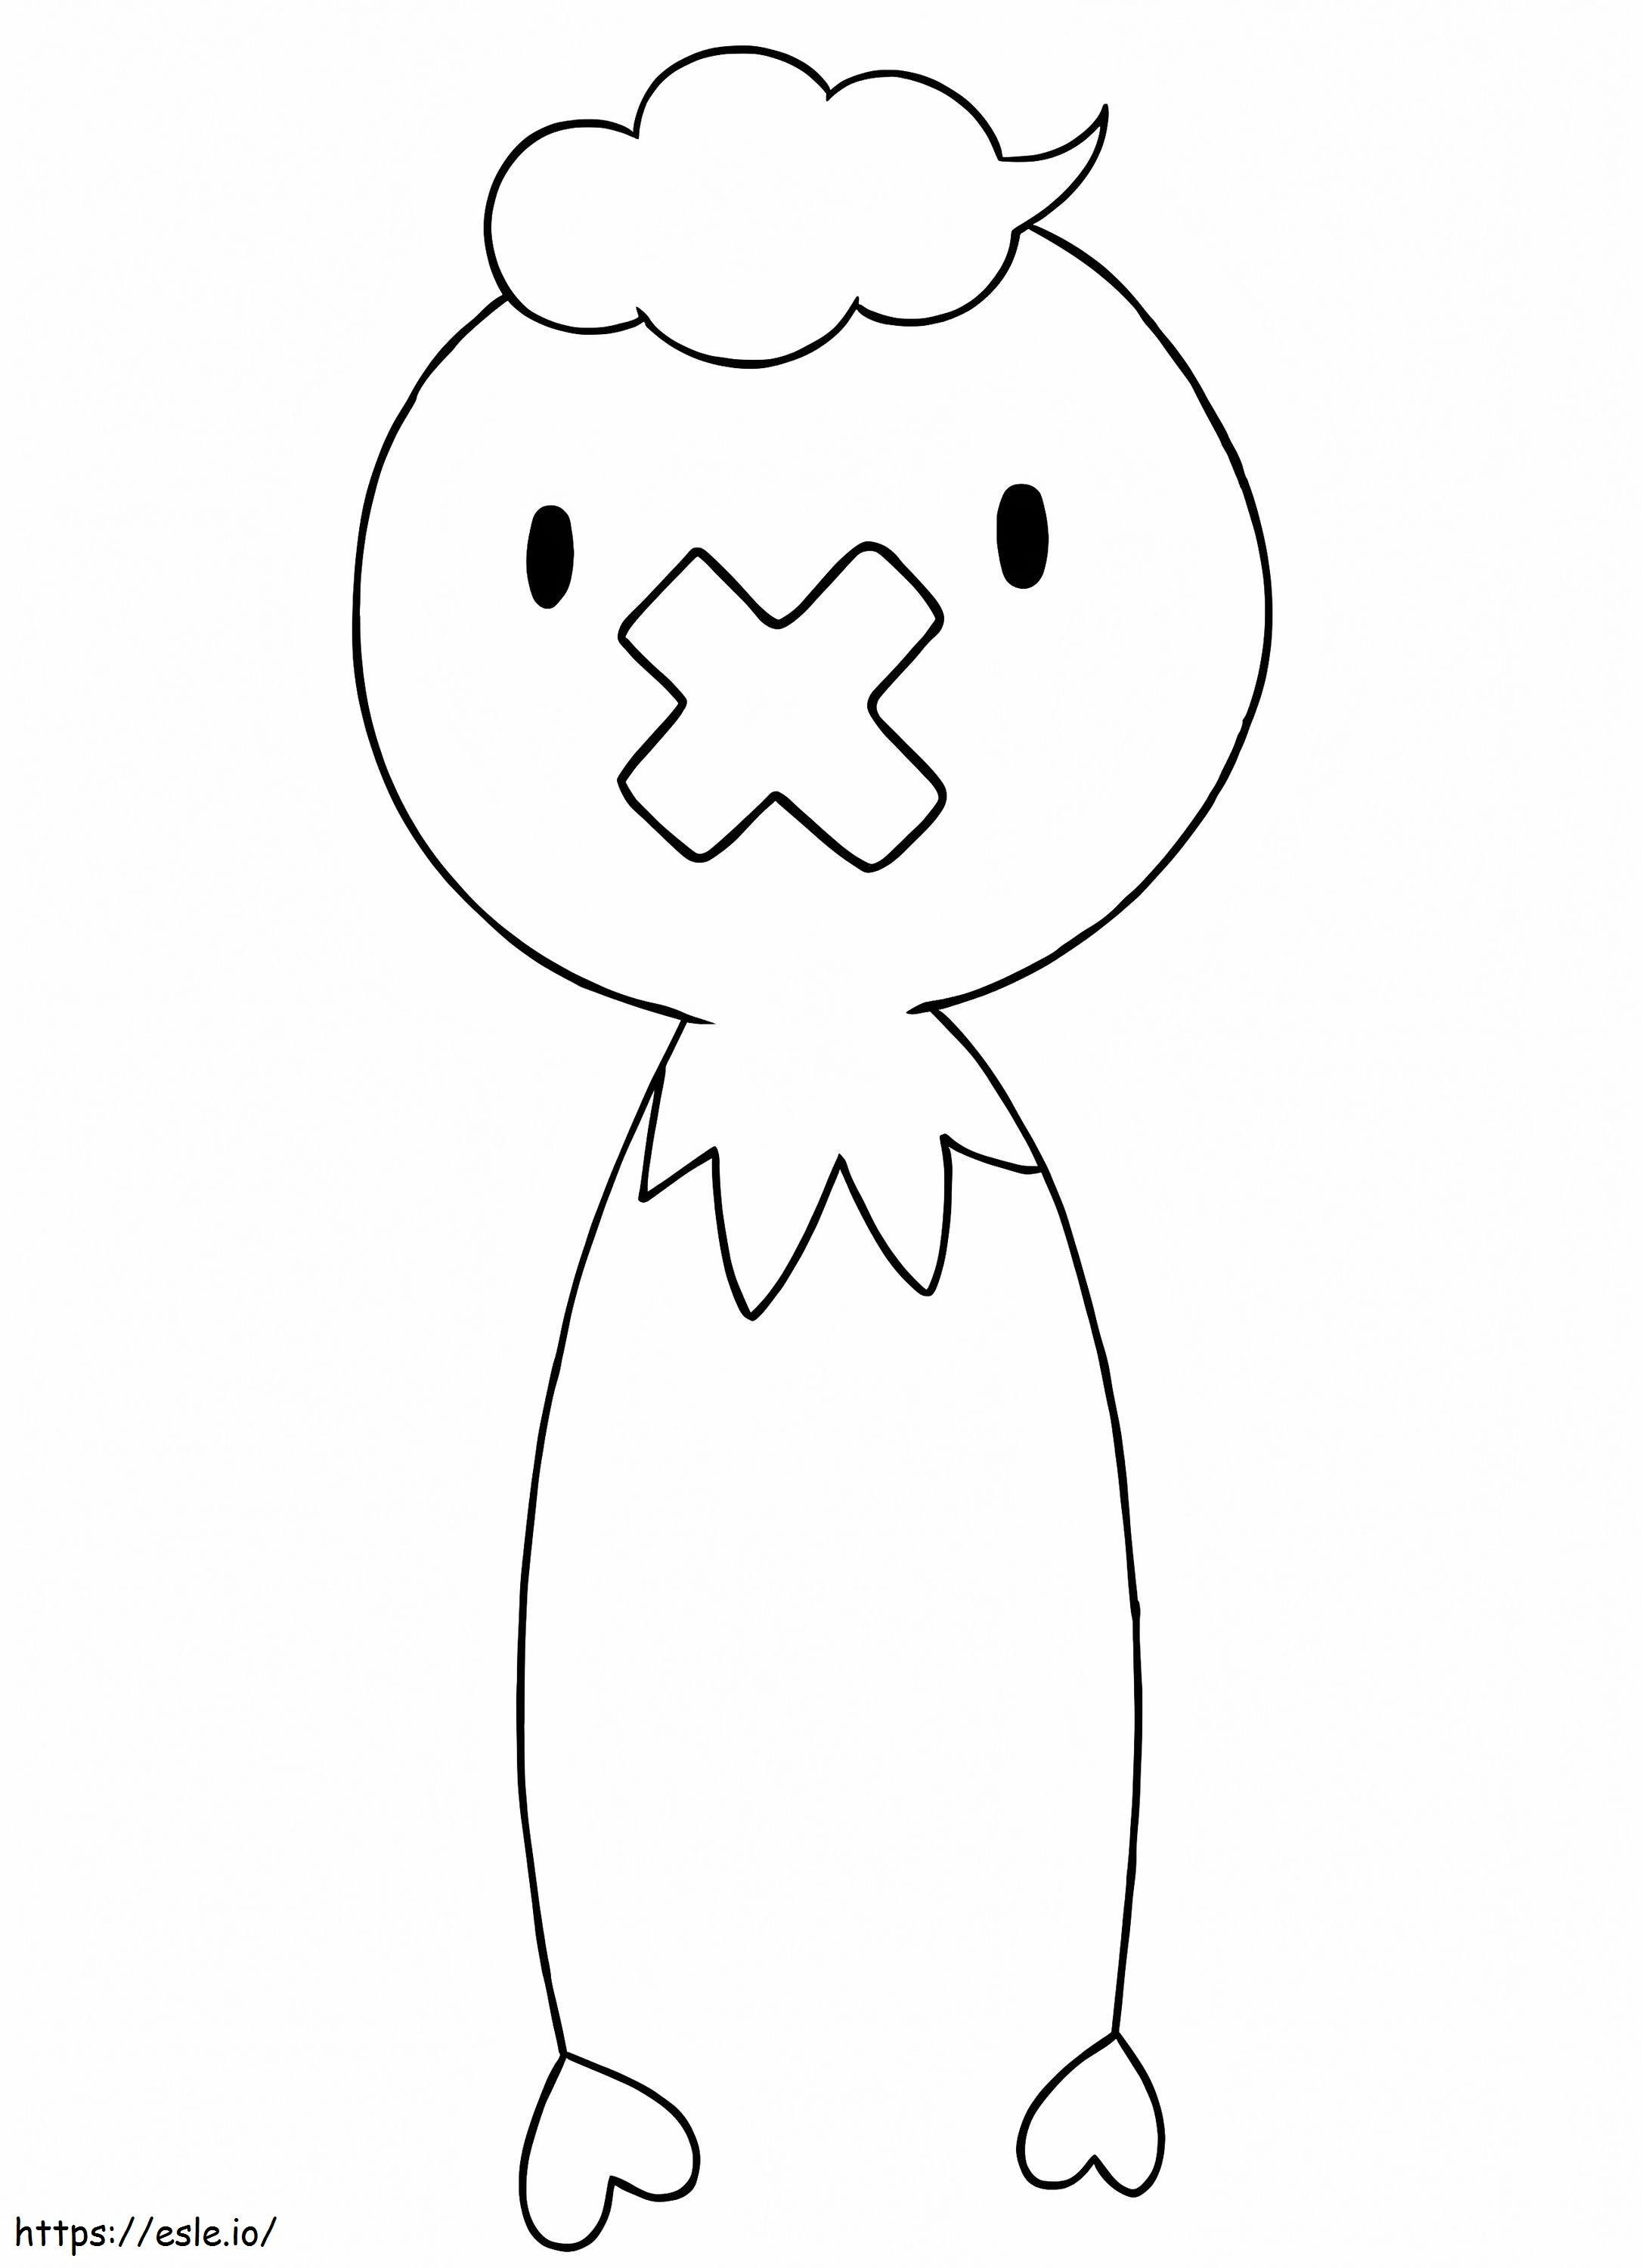 Cute Drifloon coloring page